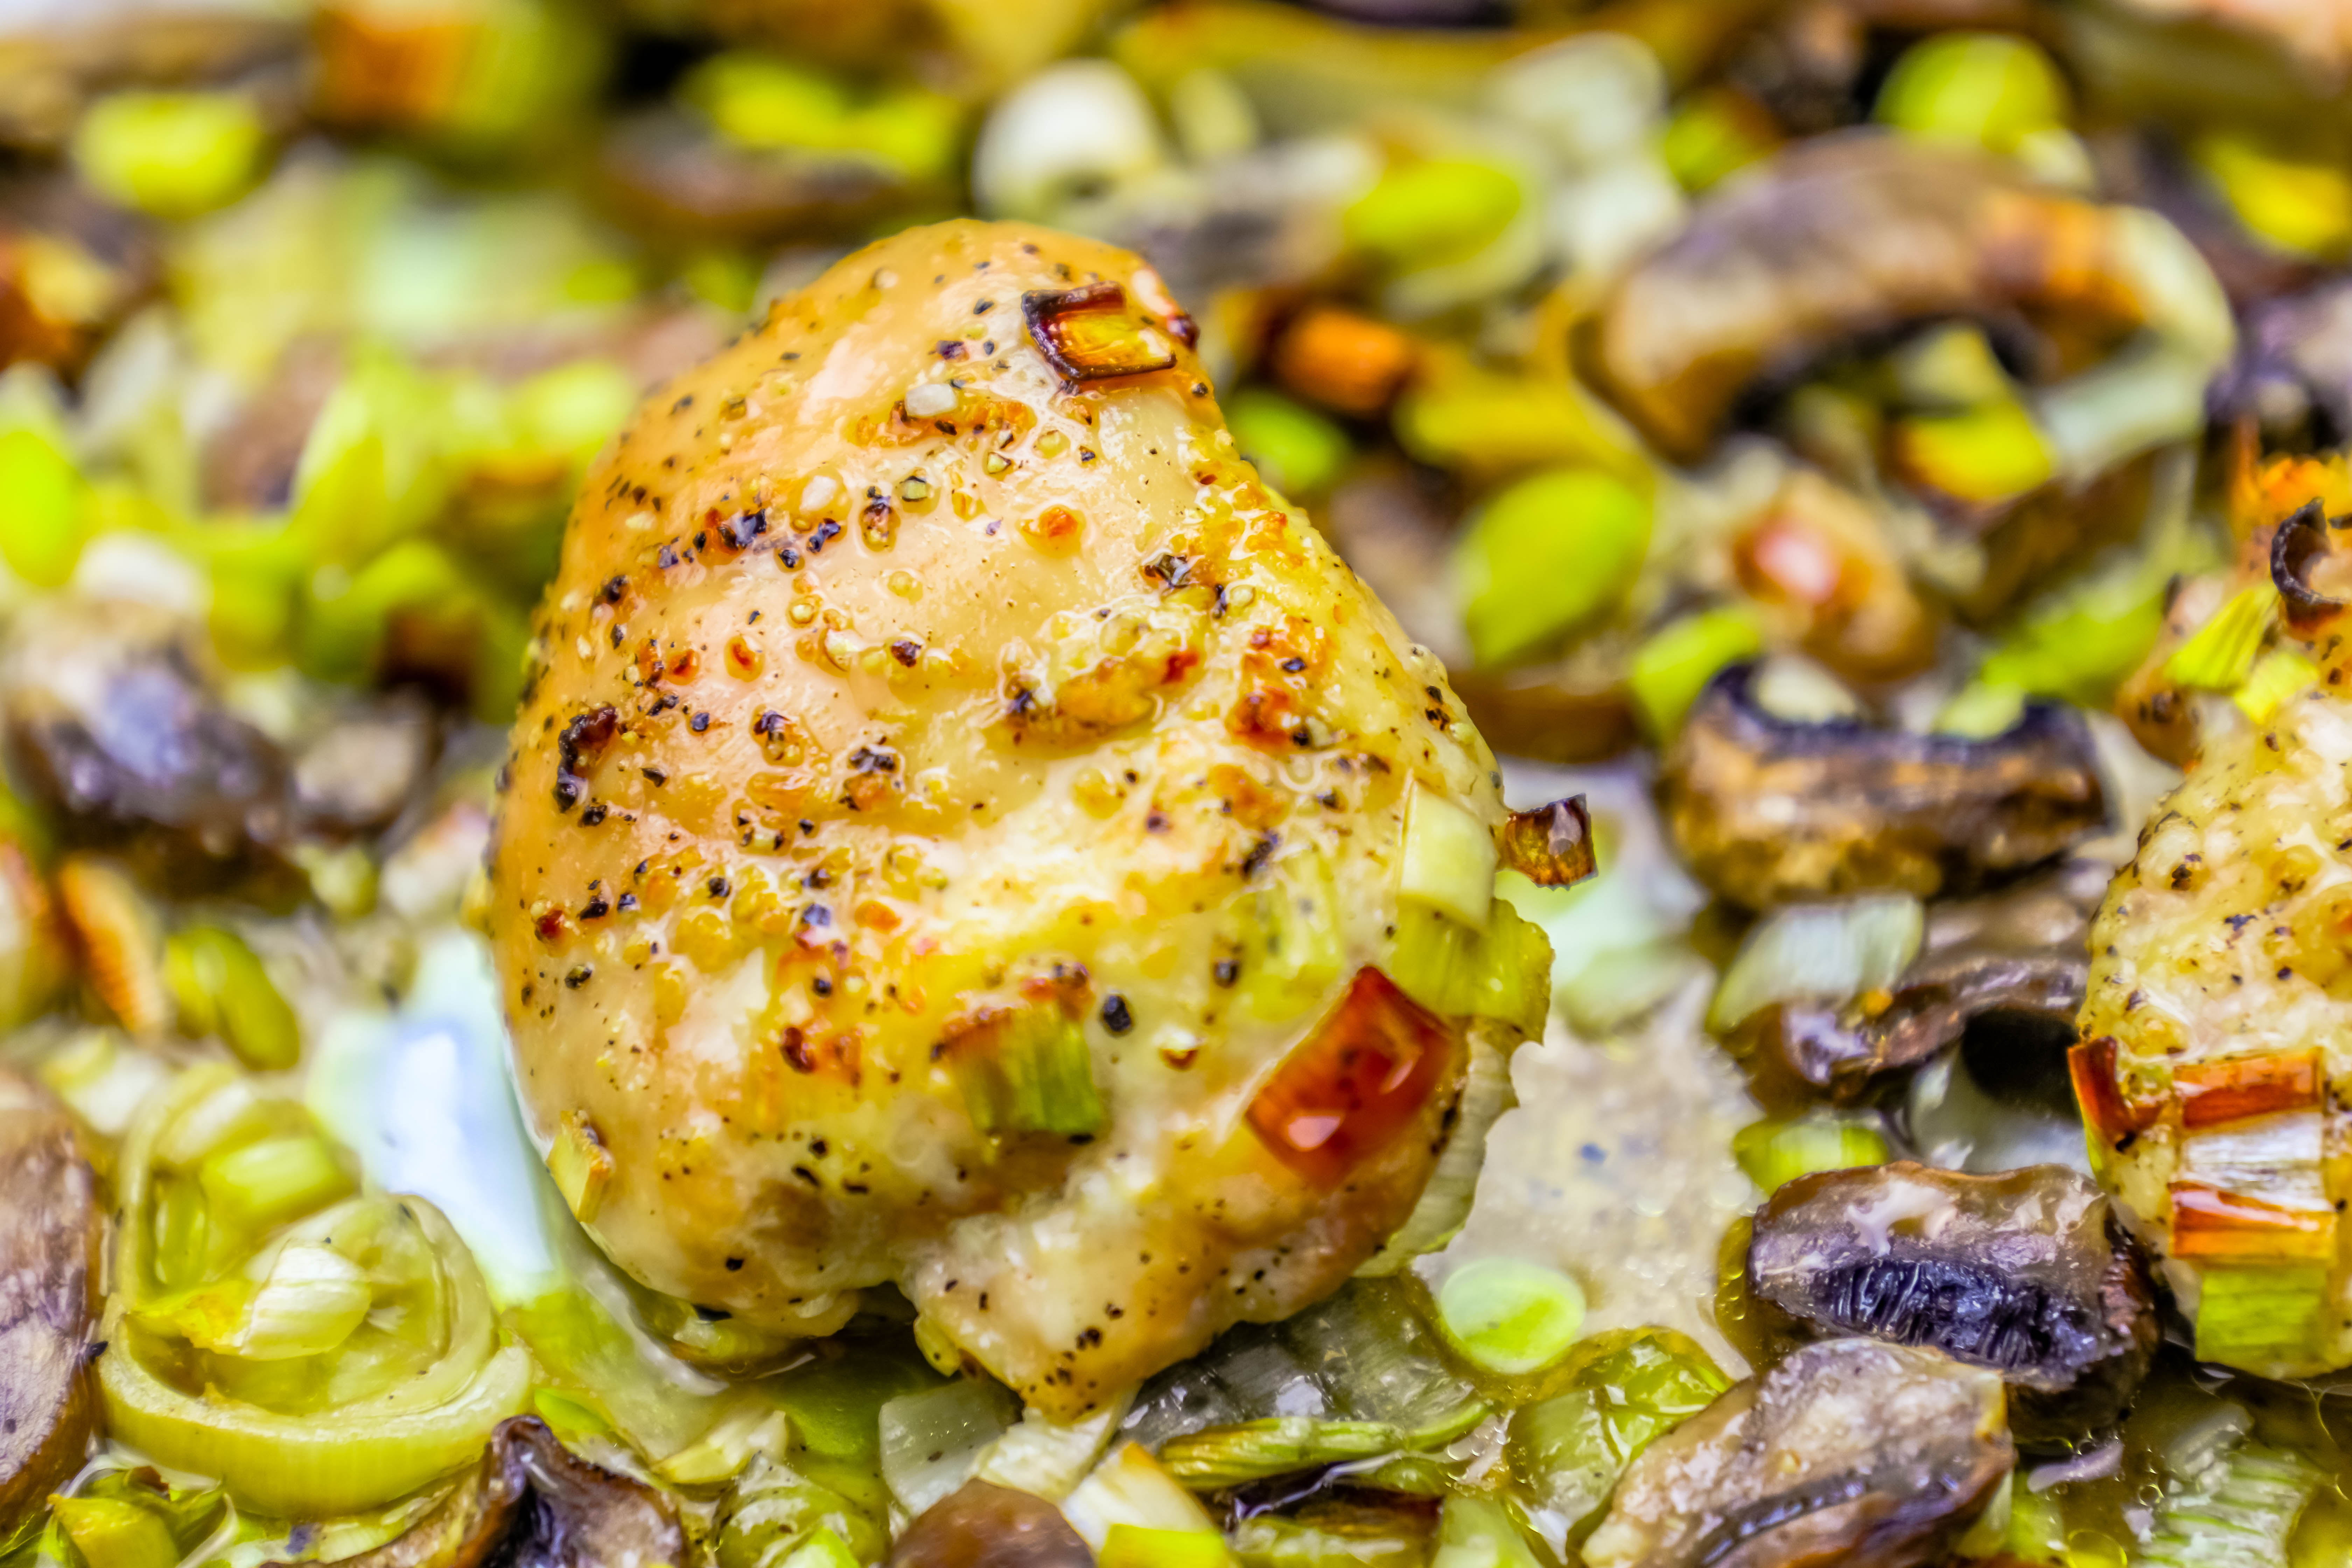 chicken thigh with seasoning, leeks and mushrooms in the background